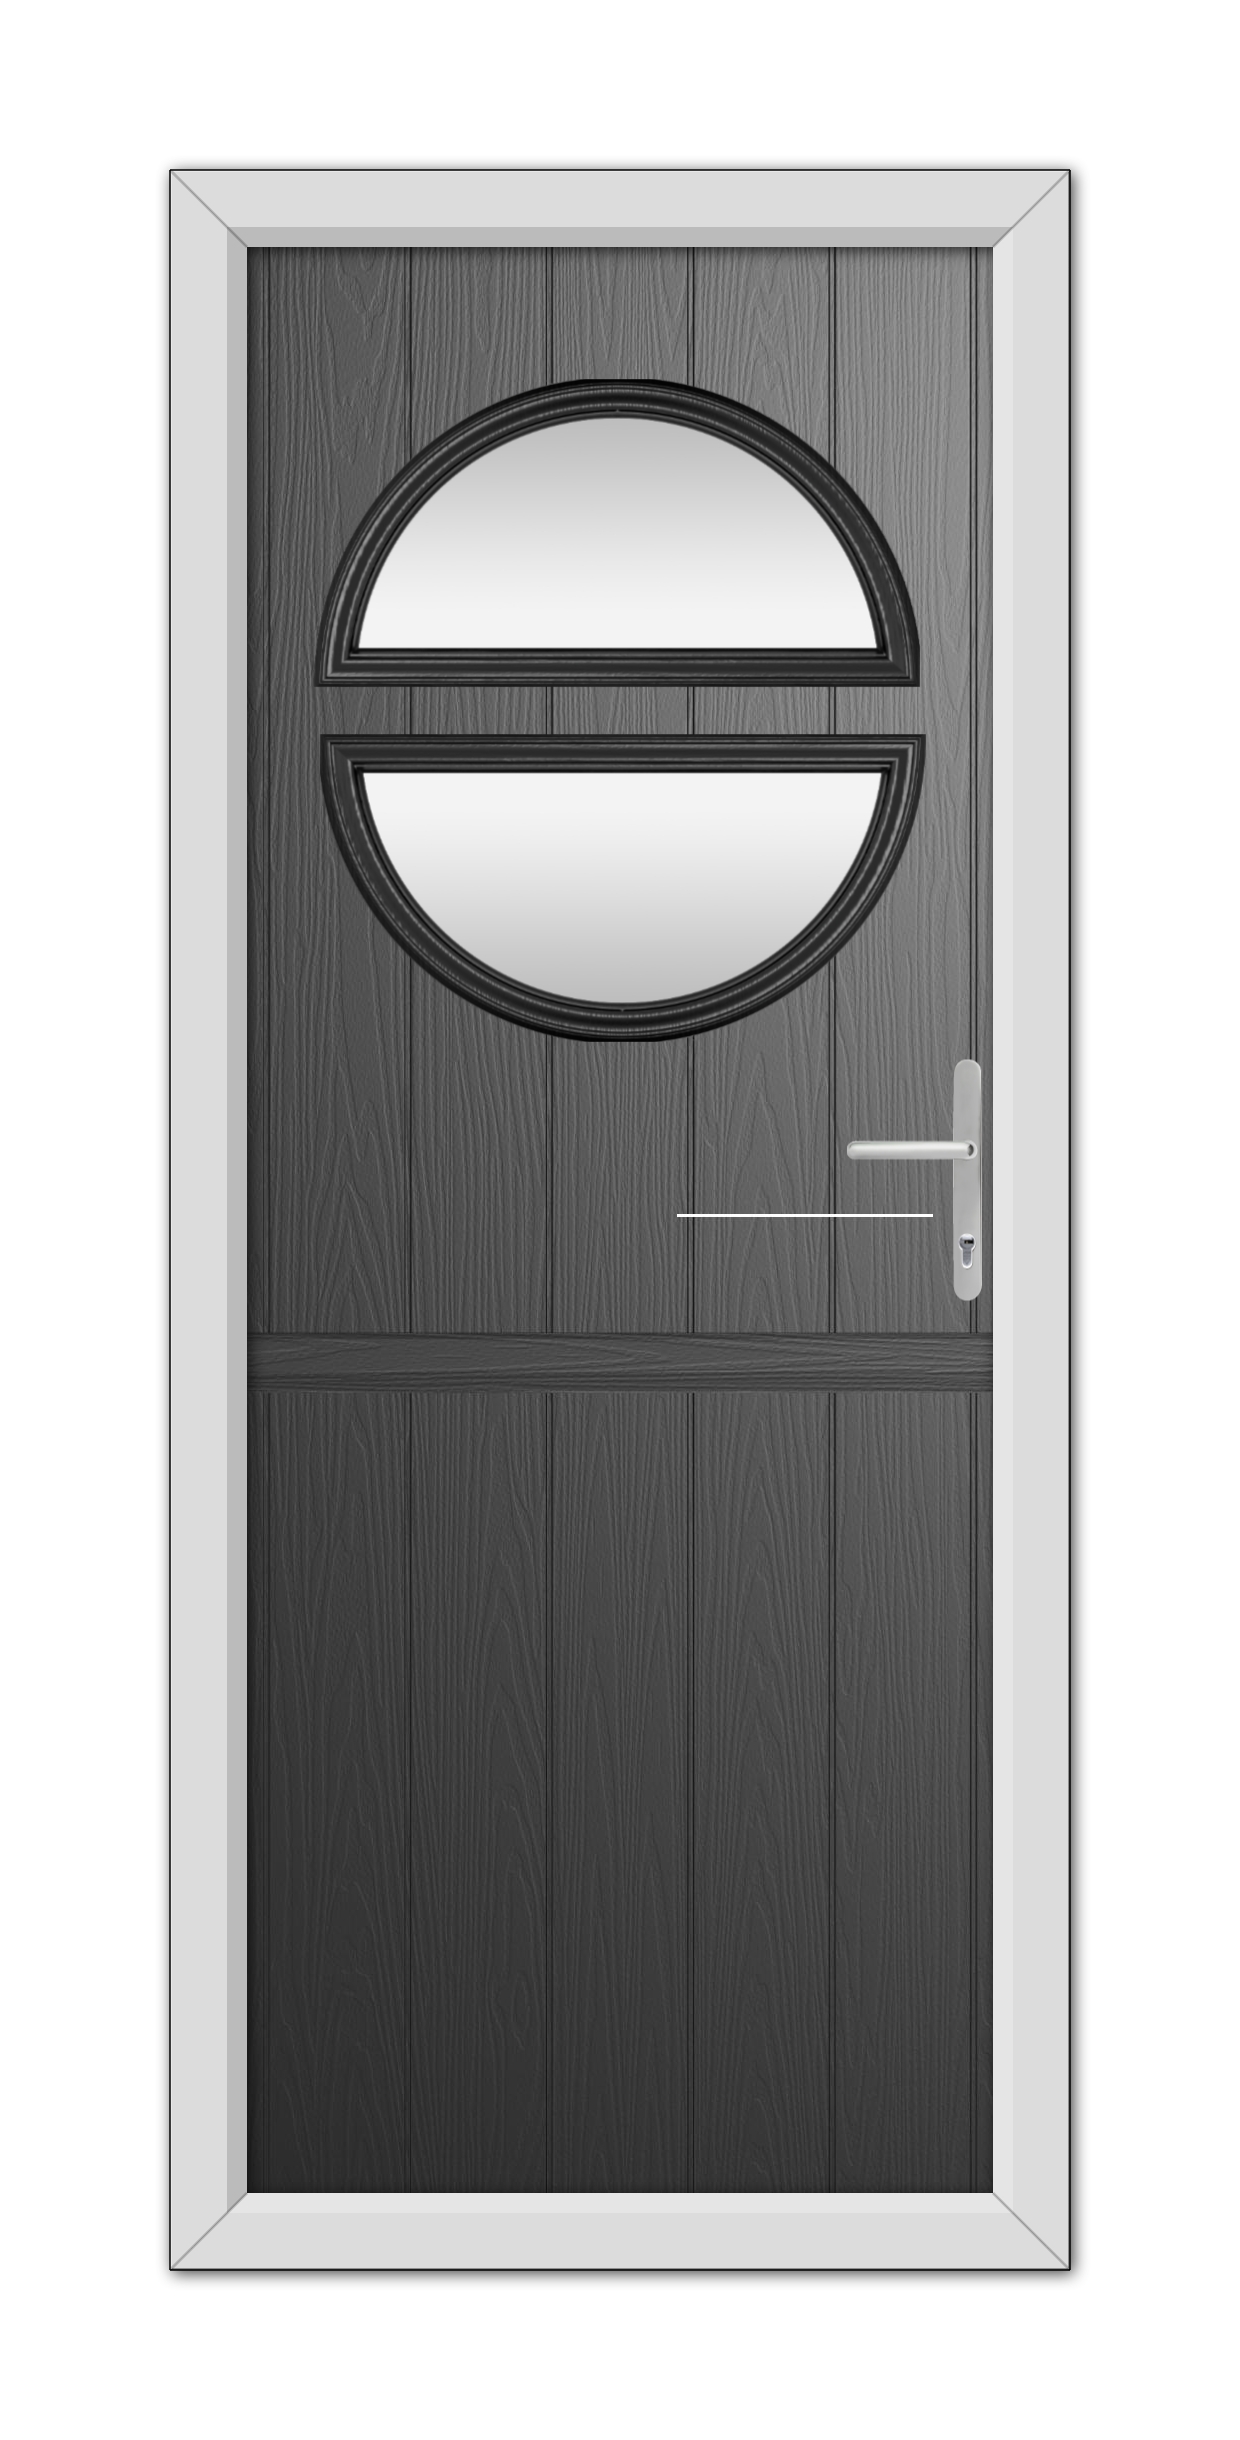 A modern Black Kent Stable Composite Door 48mm Timber Core door with an oval window at the top, set in a light gray frame, featuring a sleek metal handle on the right side.